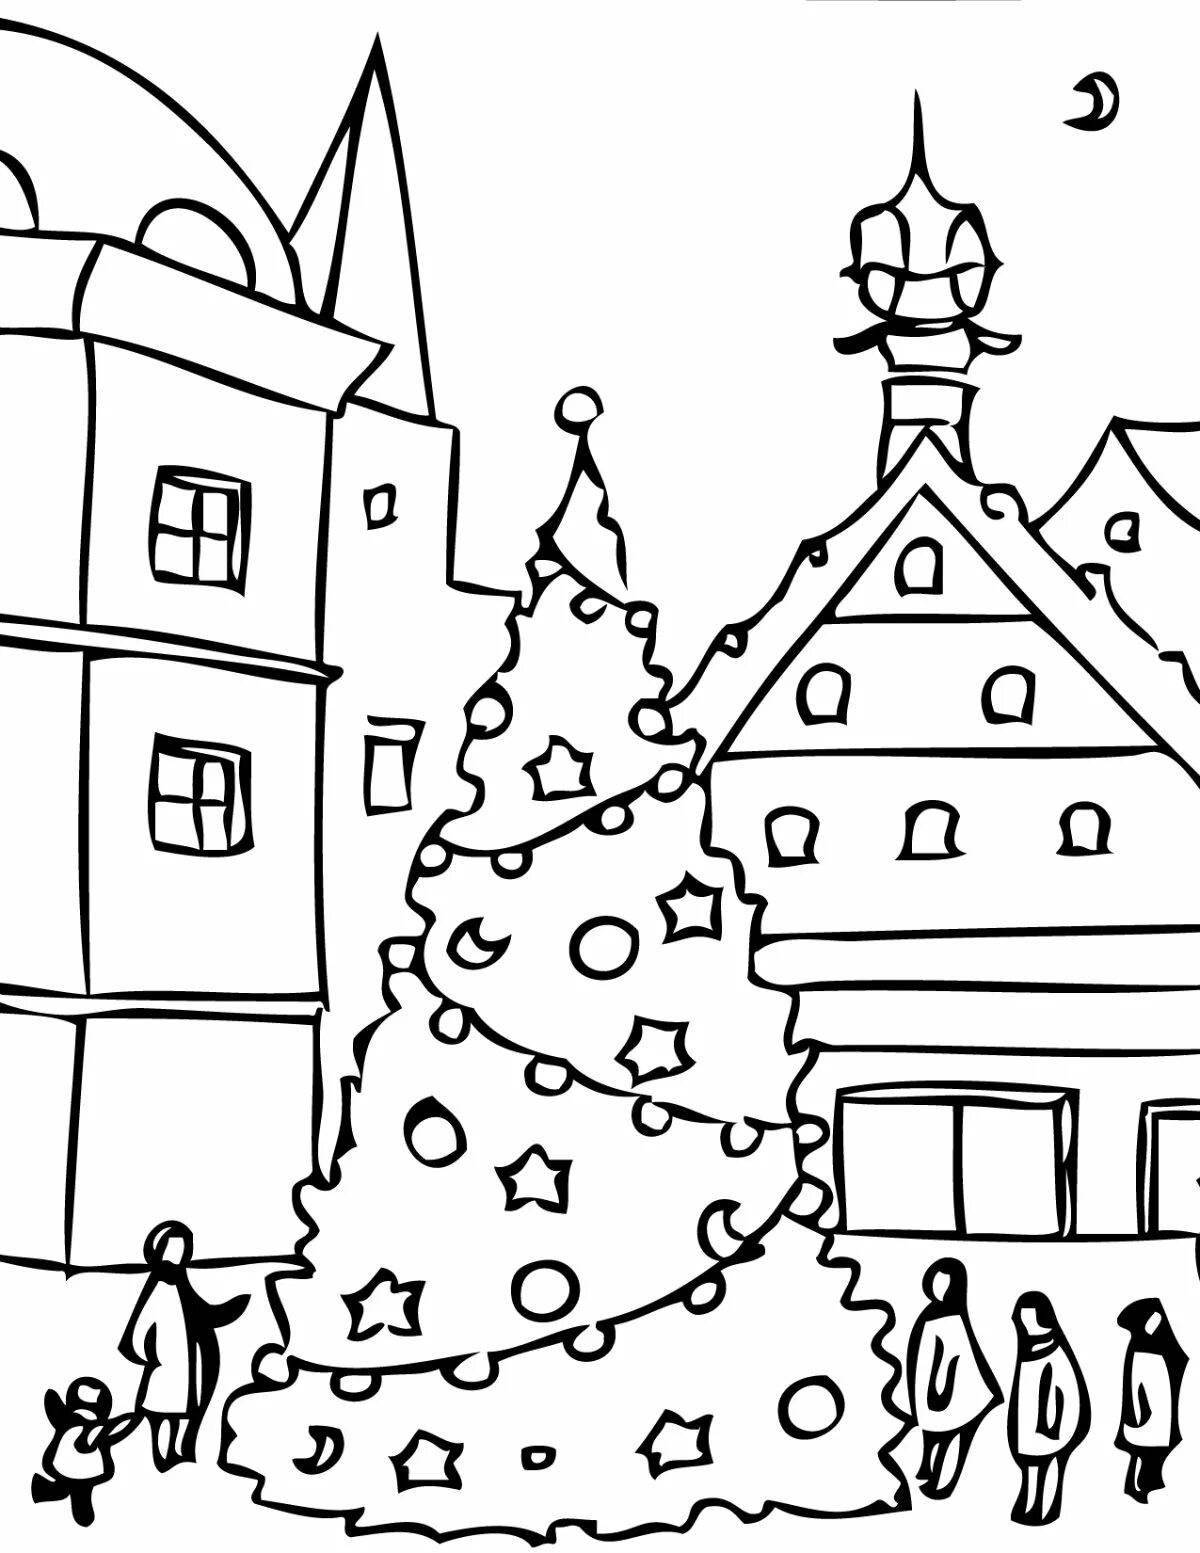 Colorful winter town coloring page for kids